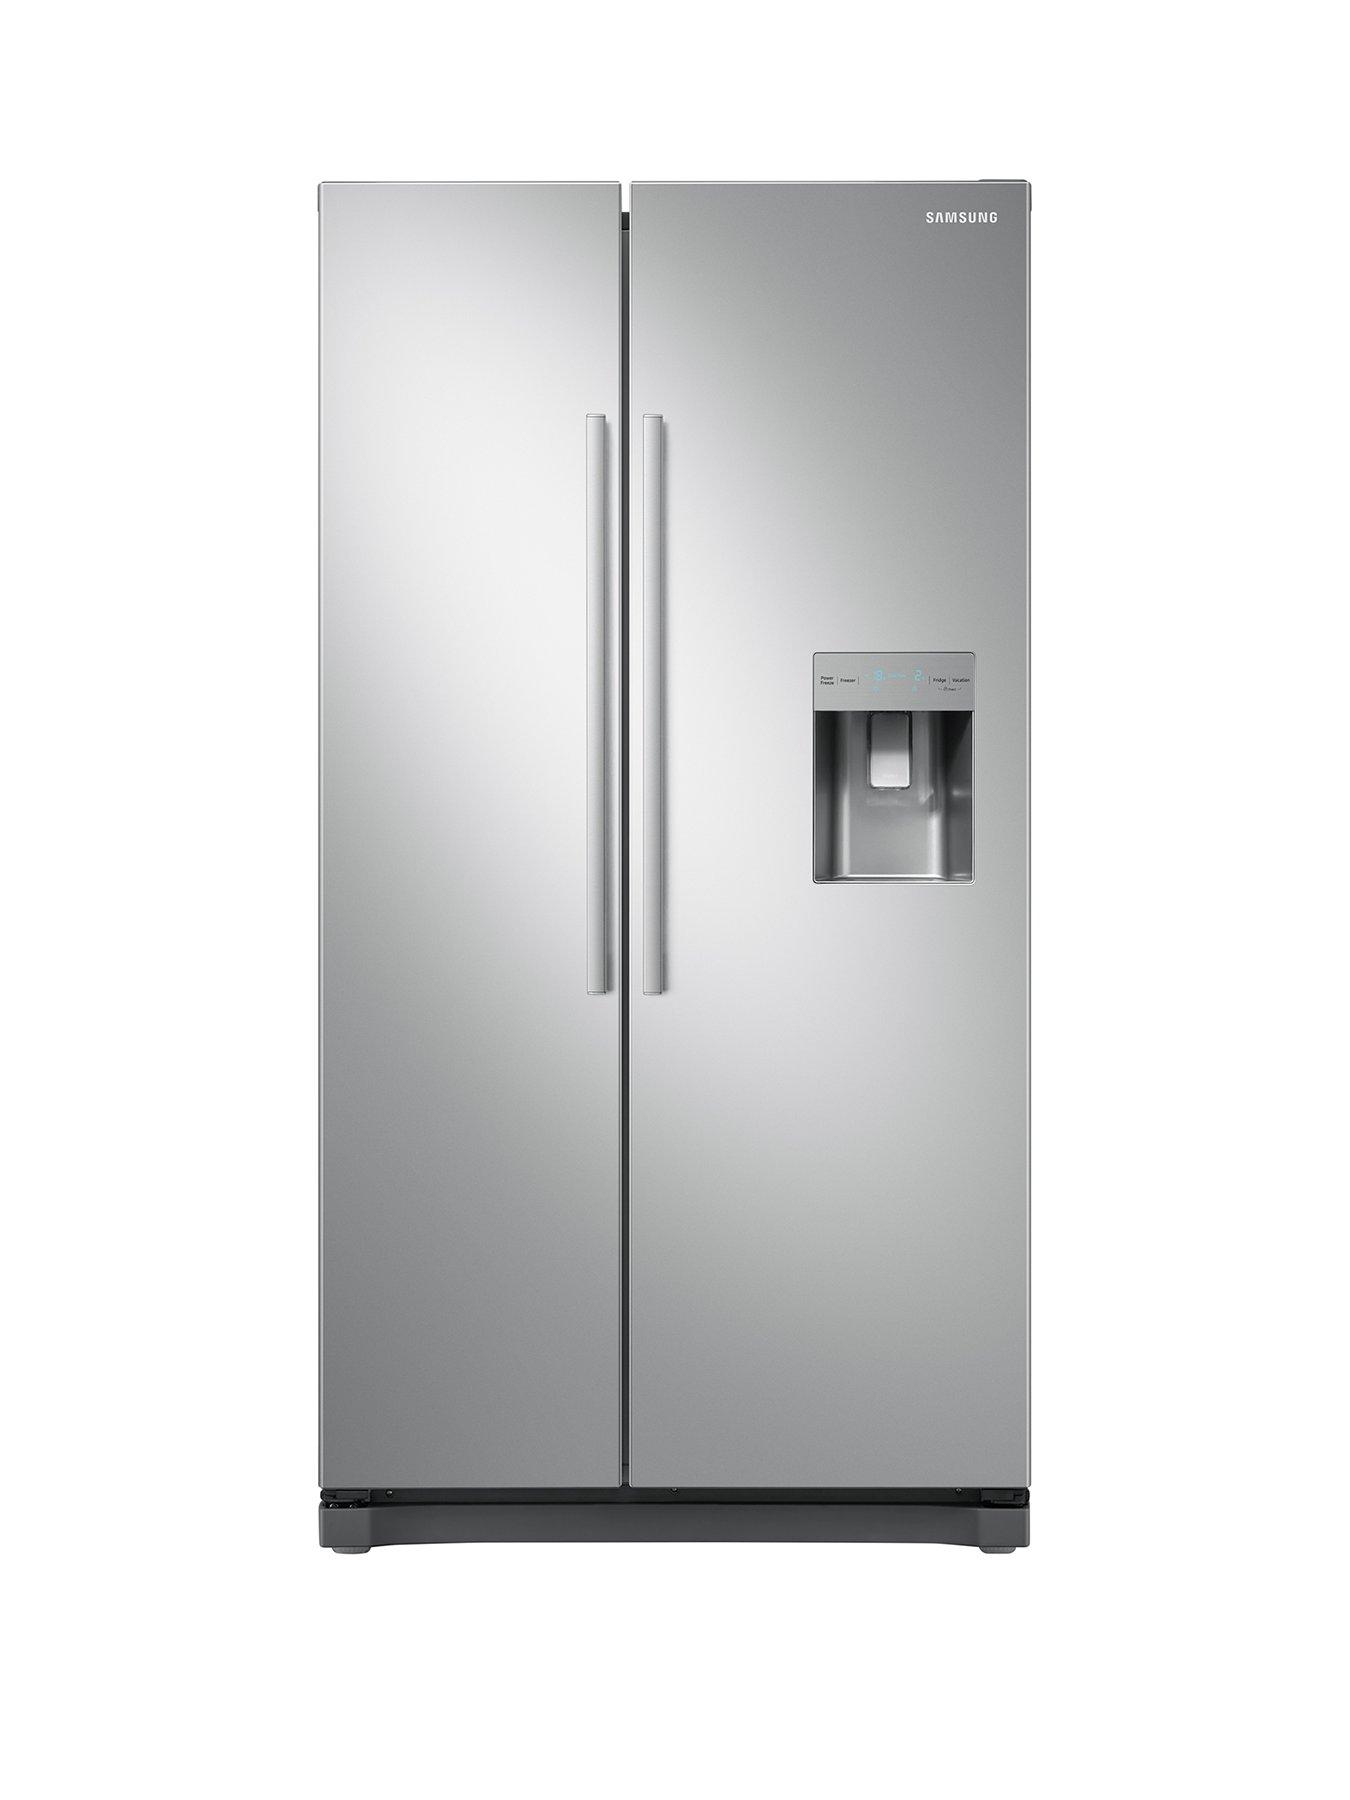 Samsung Rs52N3313Sa/Eu American Style Frost Free Fridge Freezer With Non Plumbed Water Dispenser And 5 Year Samsung Parts And Labour Warranty – Graphite